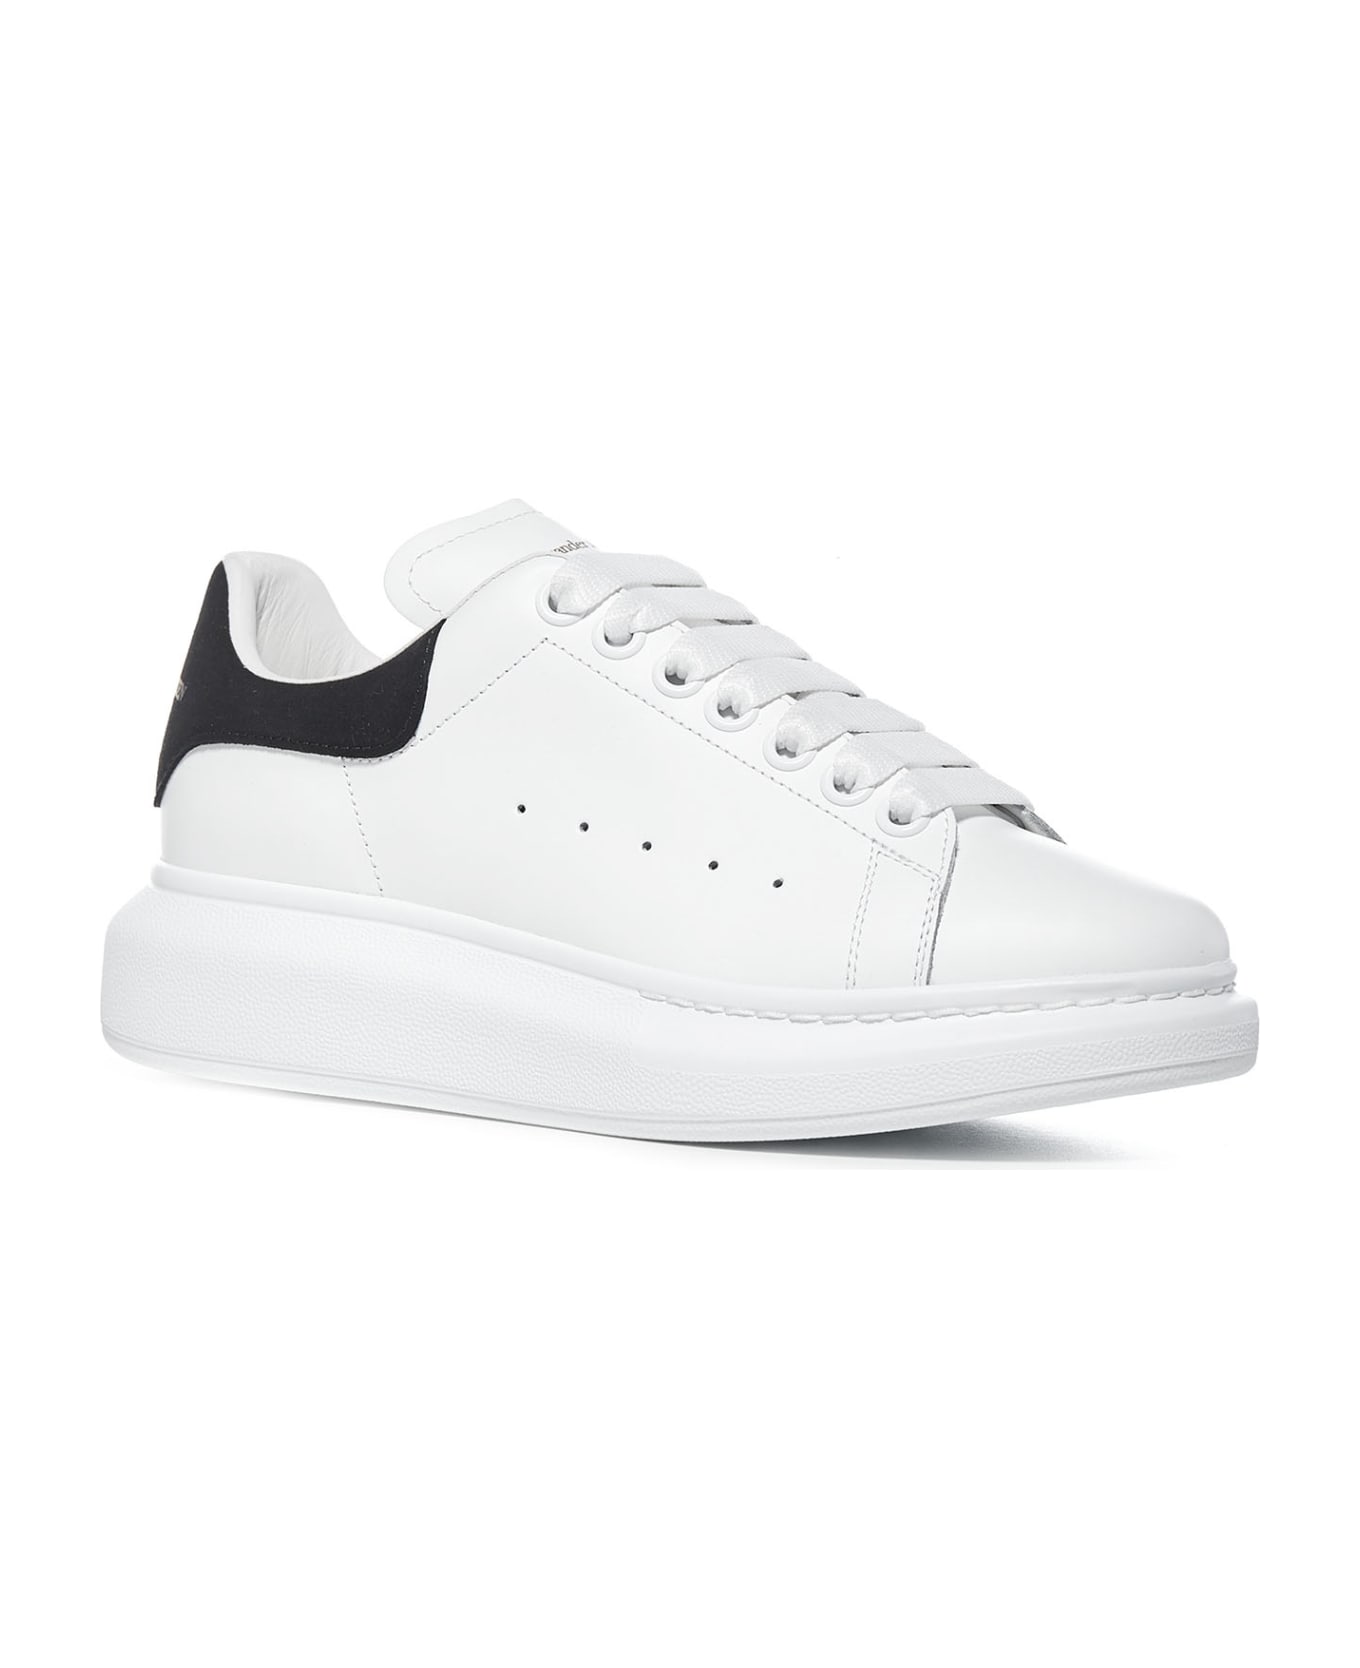 Alexander McQueen Oversized Sneakers In Leather With Contrasting Heel Tab - White Black